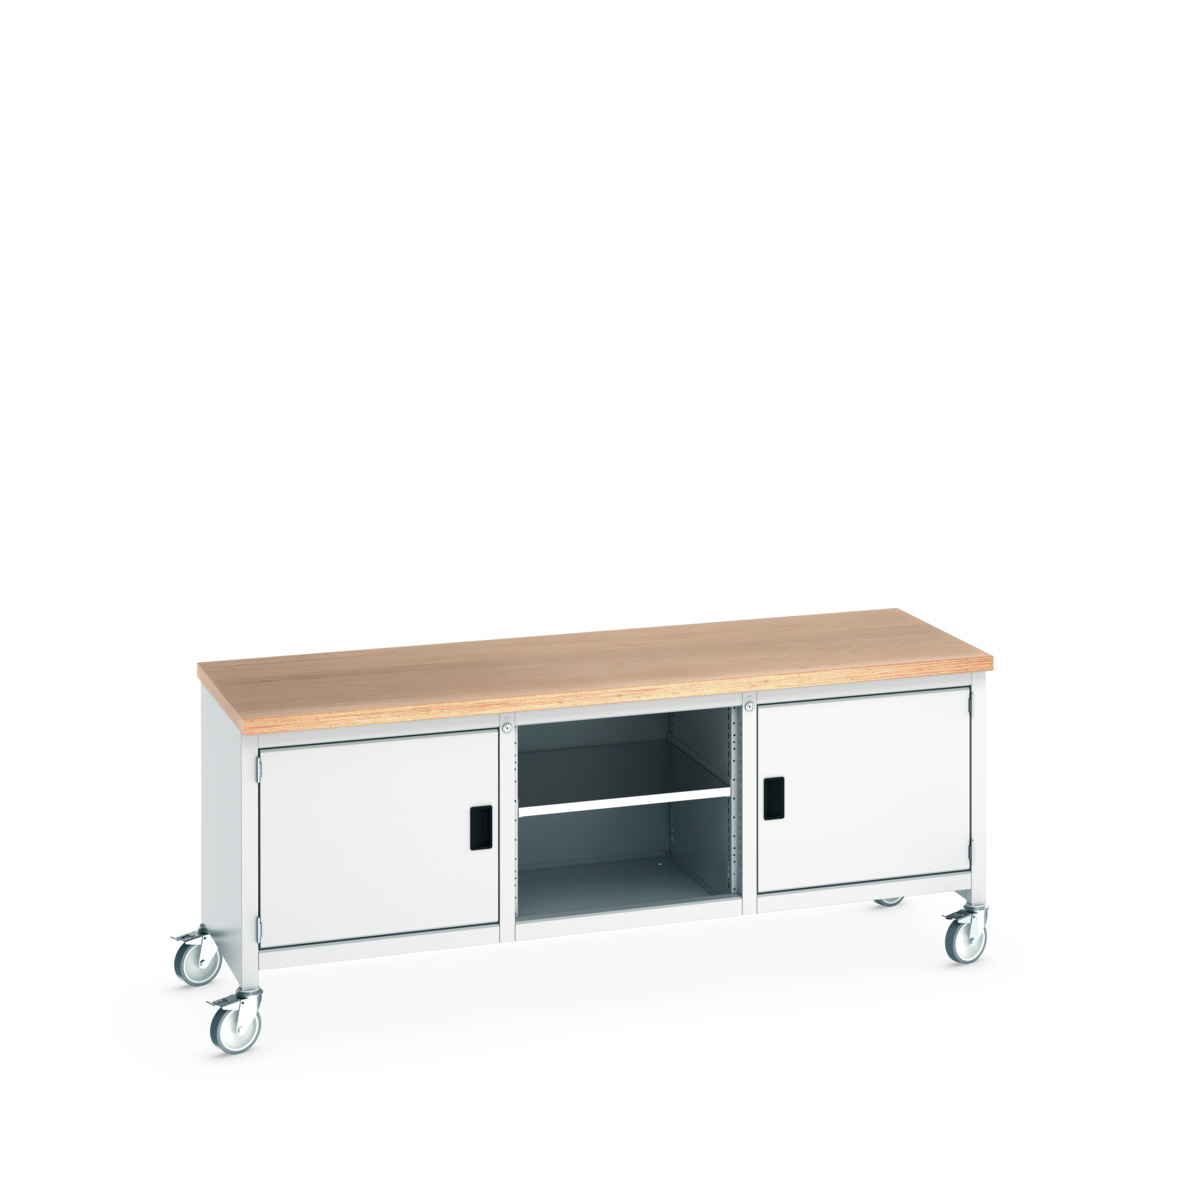 41002118.16V - cubio mobile storage bench (mpx)